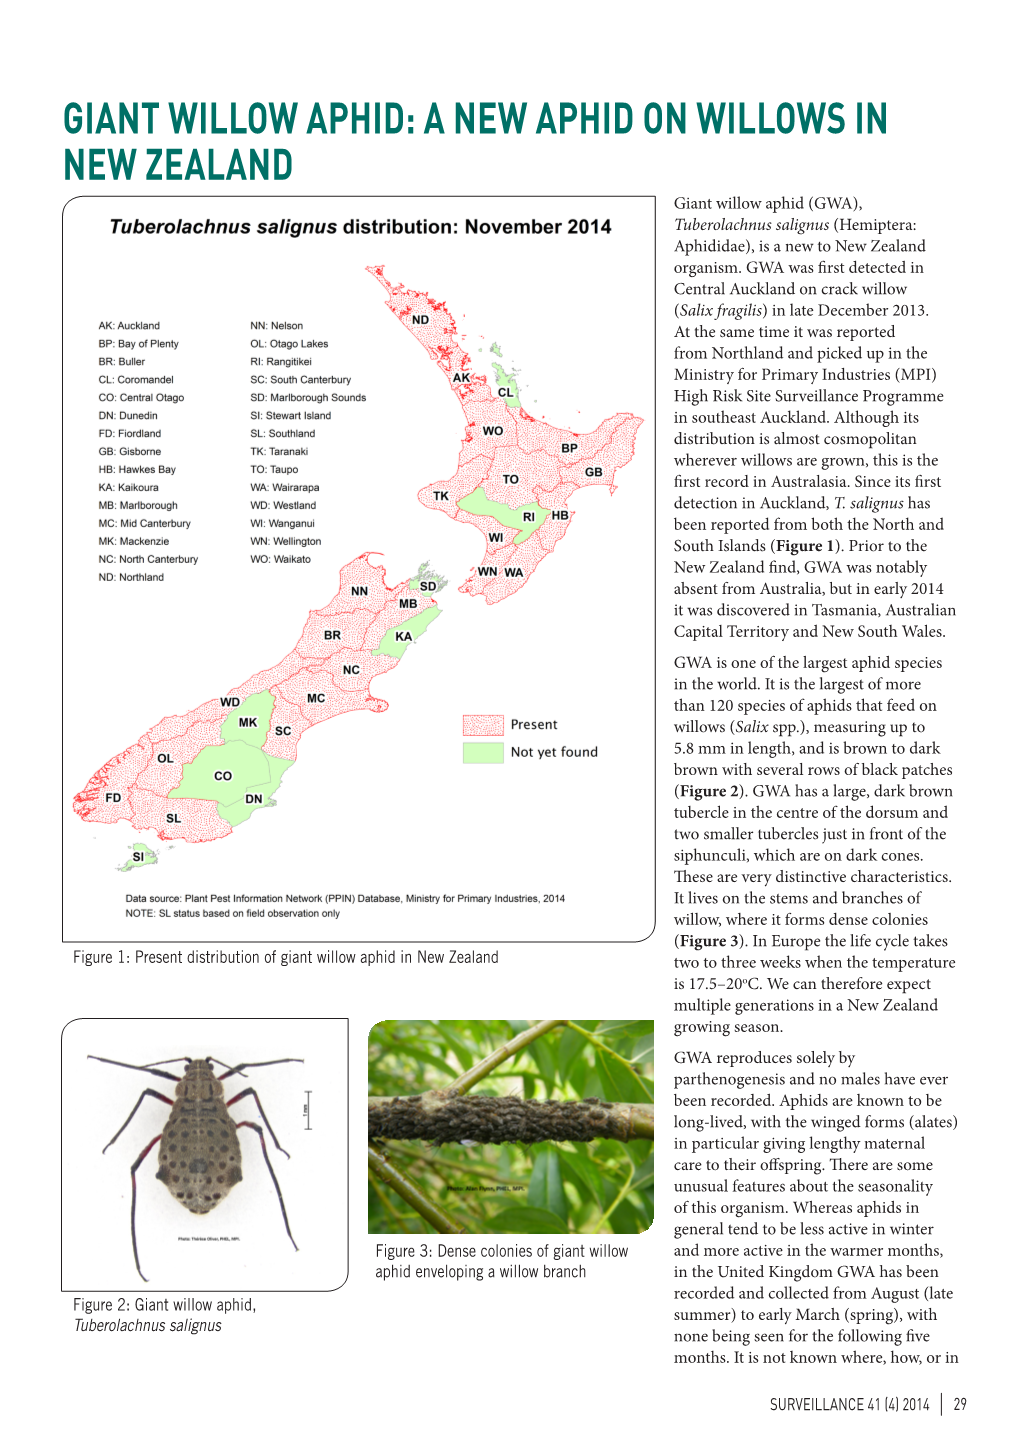 GIANT WILLOW APHID: a NEW APHID on WILLOWS in NEW ZEALAND Giant Willow Aphid (GWA), Tuberolachnus Salignus (Hemiptera: Aphididae), Is a New to New Zealand Organism